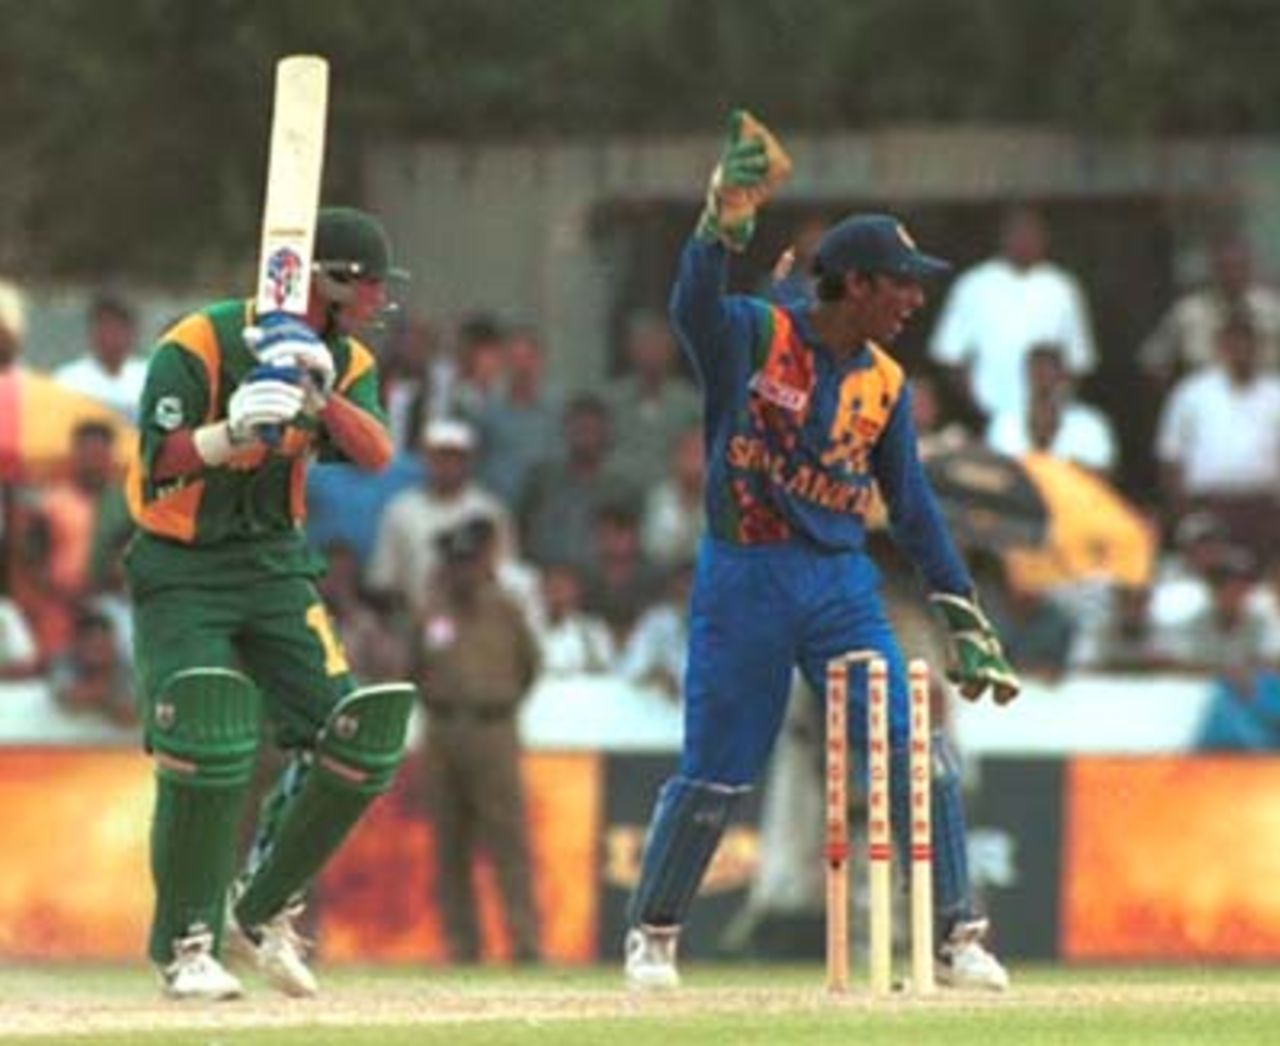 Sri Lankan wicket keeper Kumar Sangakkara celebrates as a delivery from Sri Lankan bowler Muthiah Murlitharan clean bowls the South African batsman Nicky Boje during the Singer Cup Triangular limited overs cricket match between Sri Lanka and South Africa in Galle International stadium in Galle Sri Lanka on Thursday, July. 6, 2000